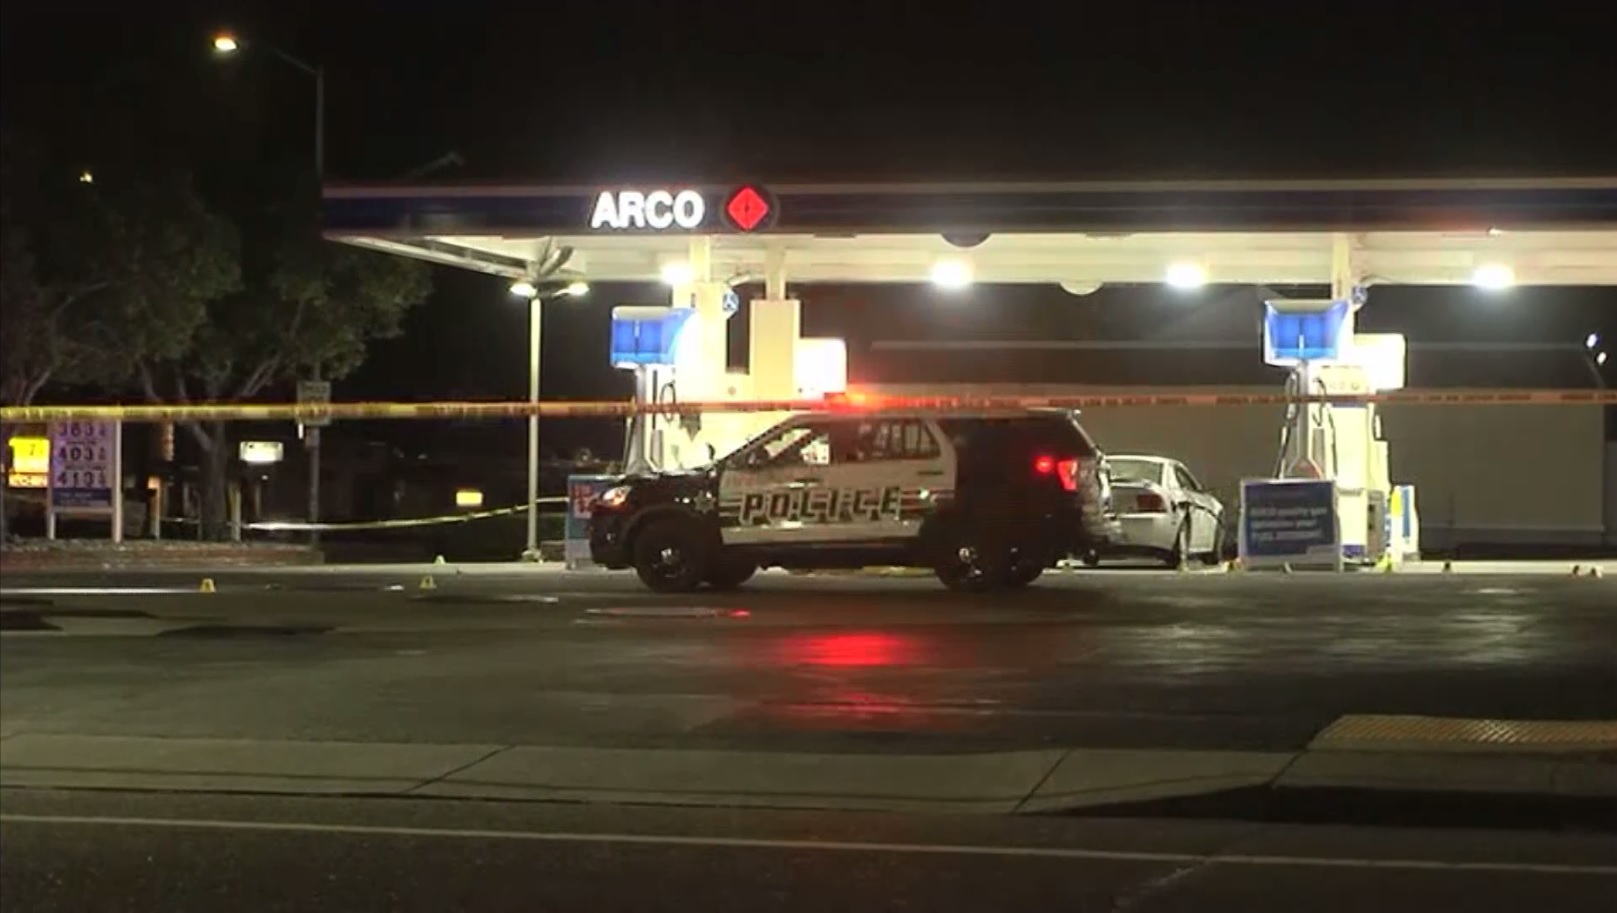 Police on the scene of a fatal shooting at an Arco station on North Texas Street in Fairfield, June 3, 2019 (CBS)